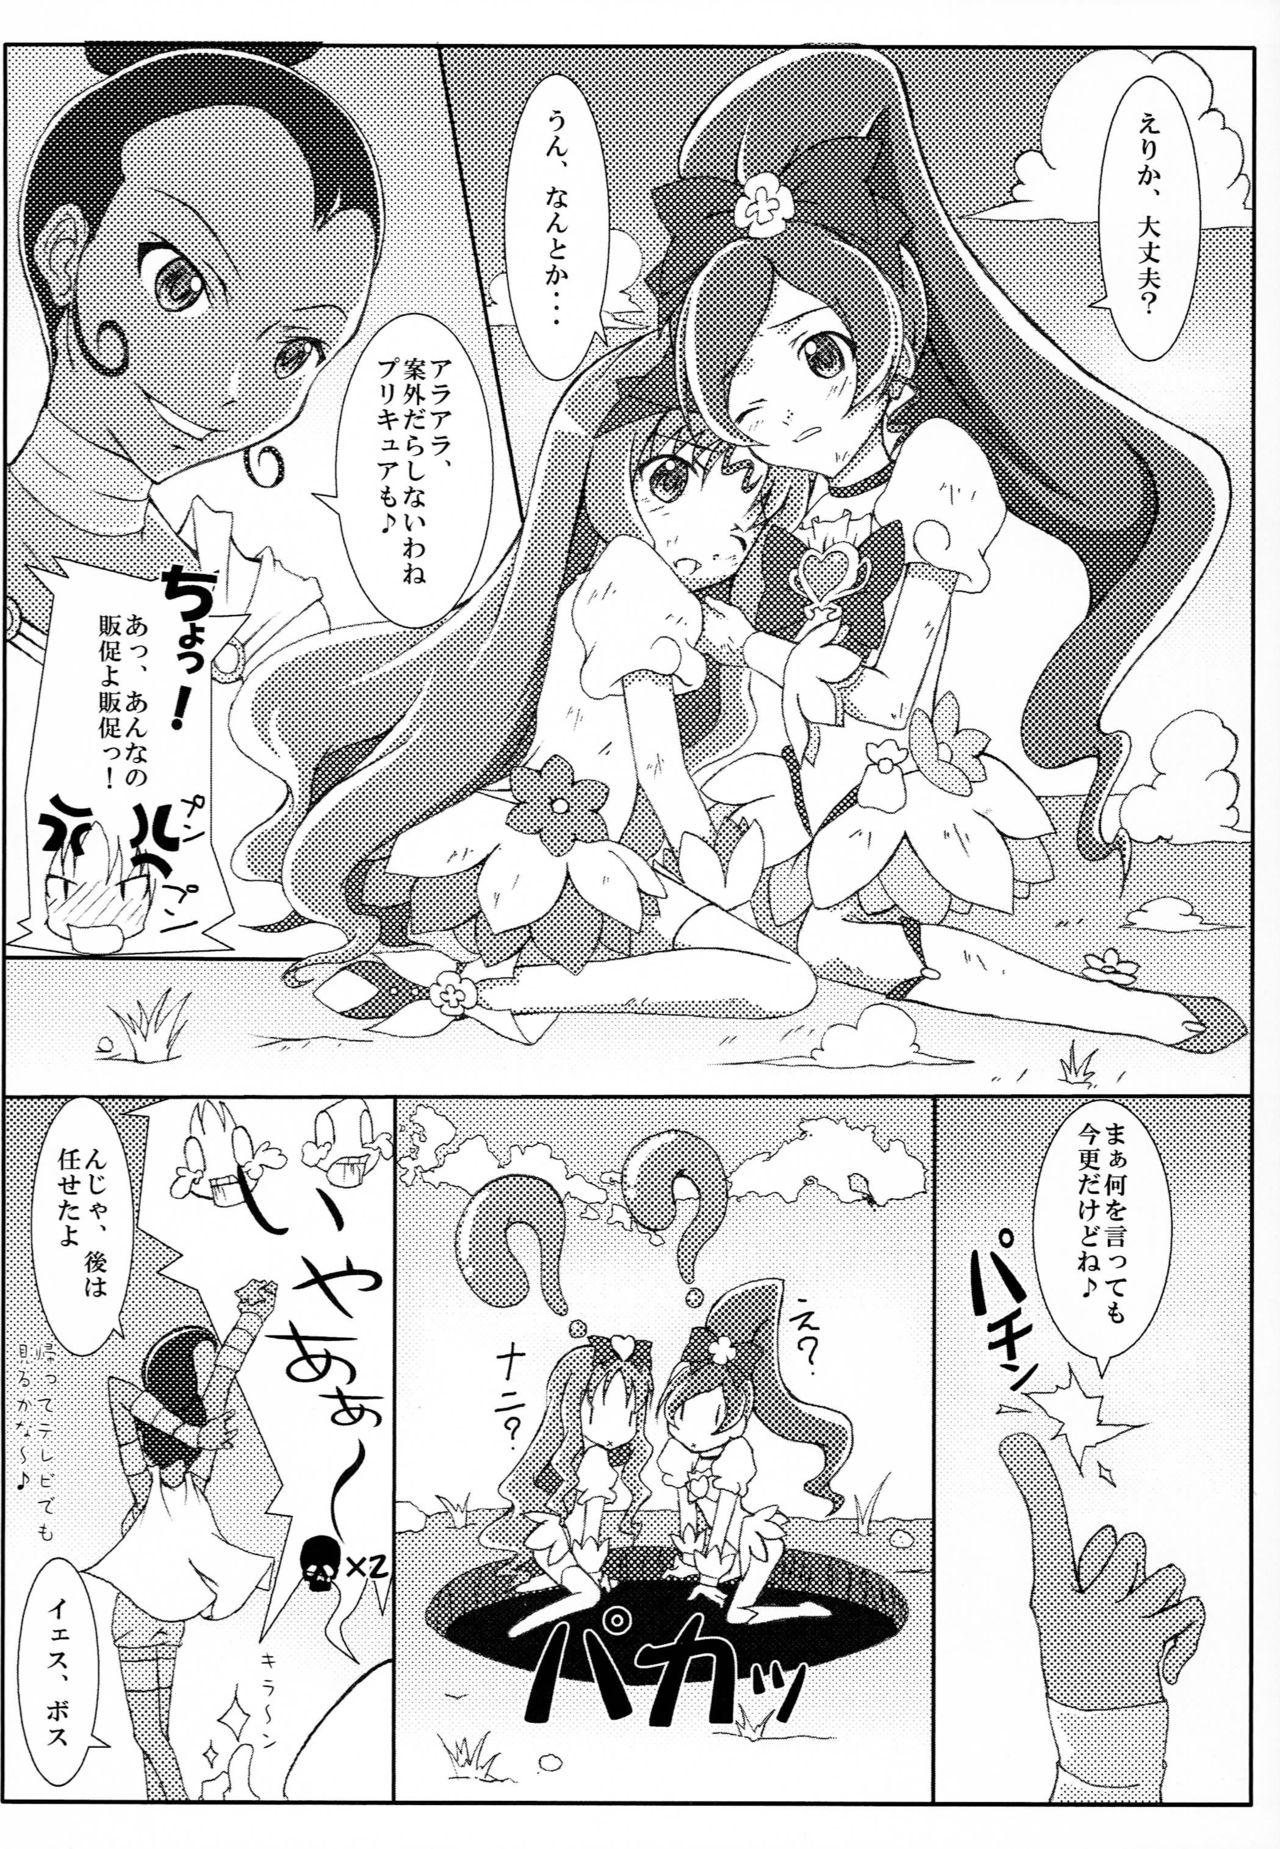 Licking Misfortunes never come singly - Heartcatch precure Livecams - Page 3